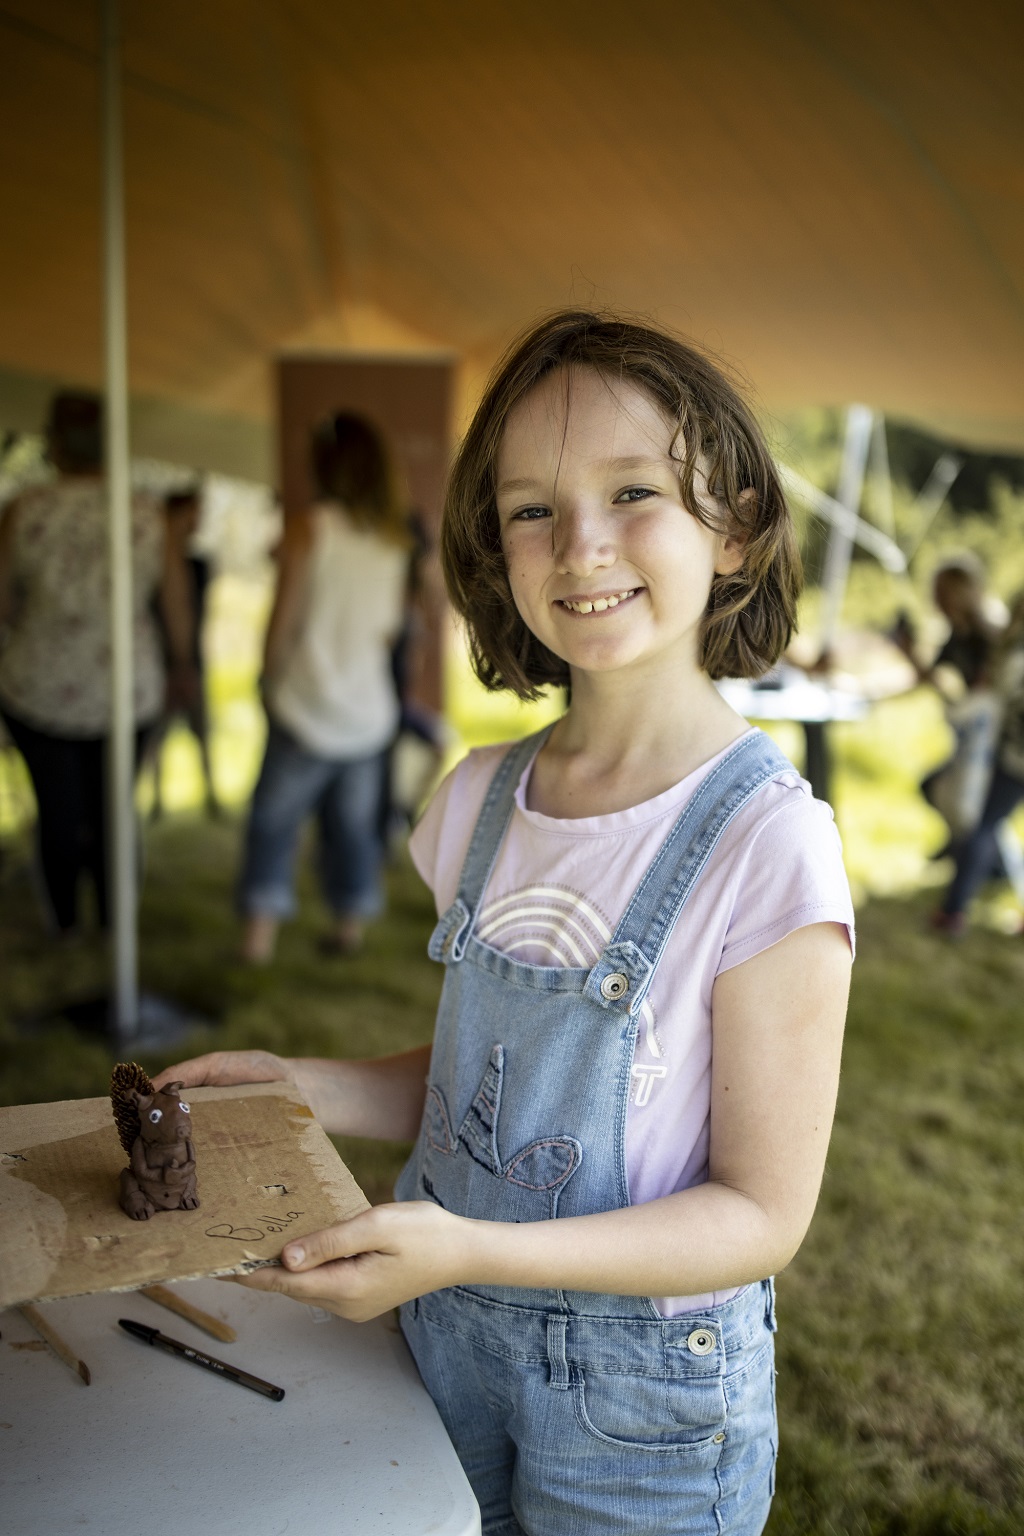 Local children were able to make red squirrels from clay during the family fun day (Photo: Alex Baxter/Trees for Life)